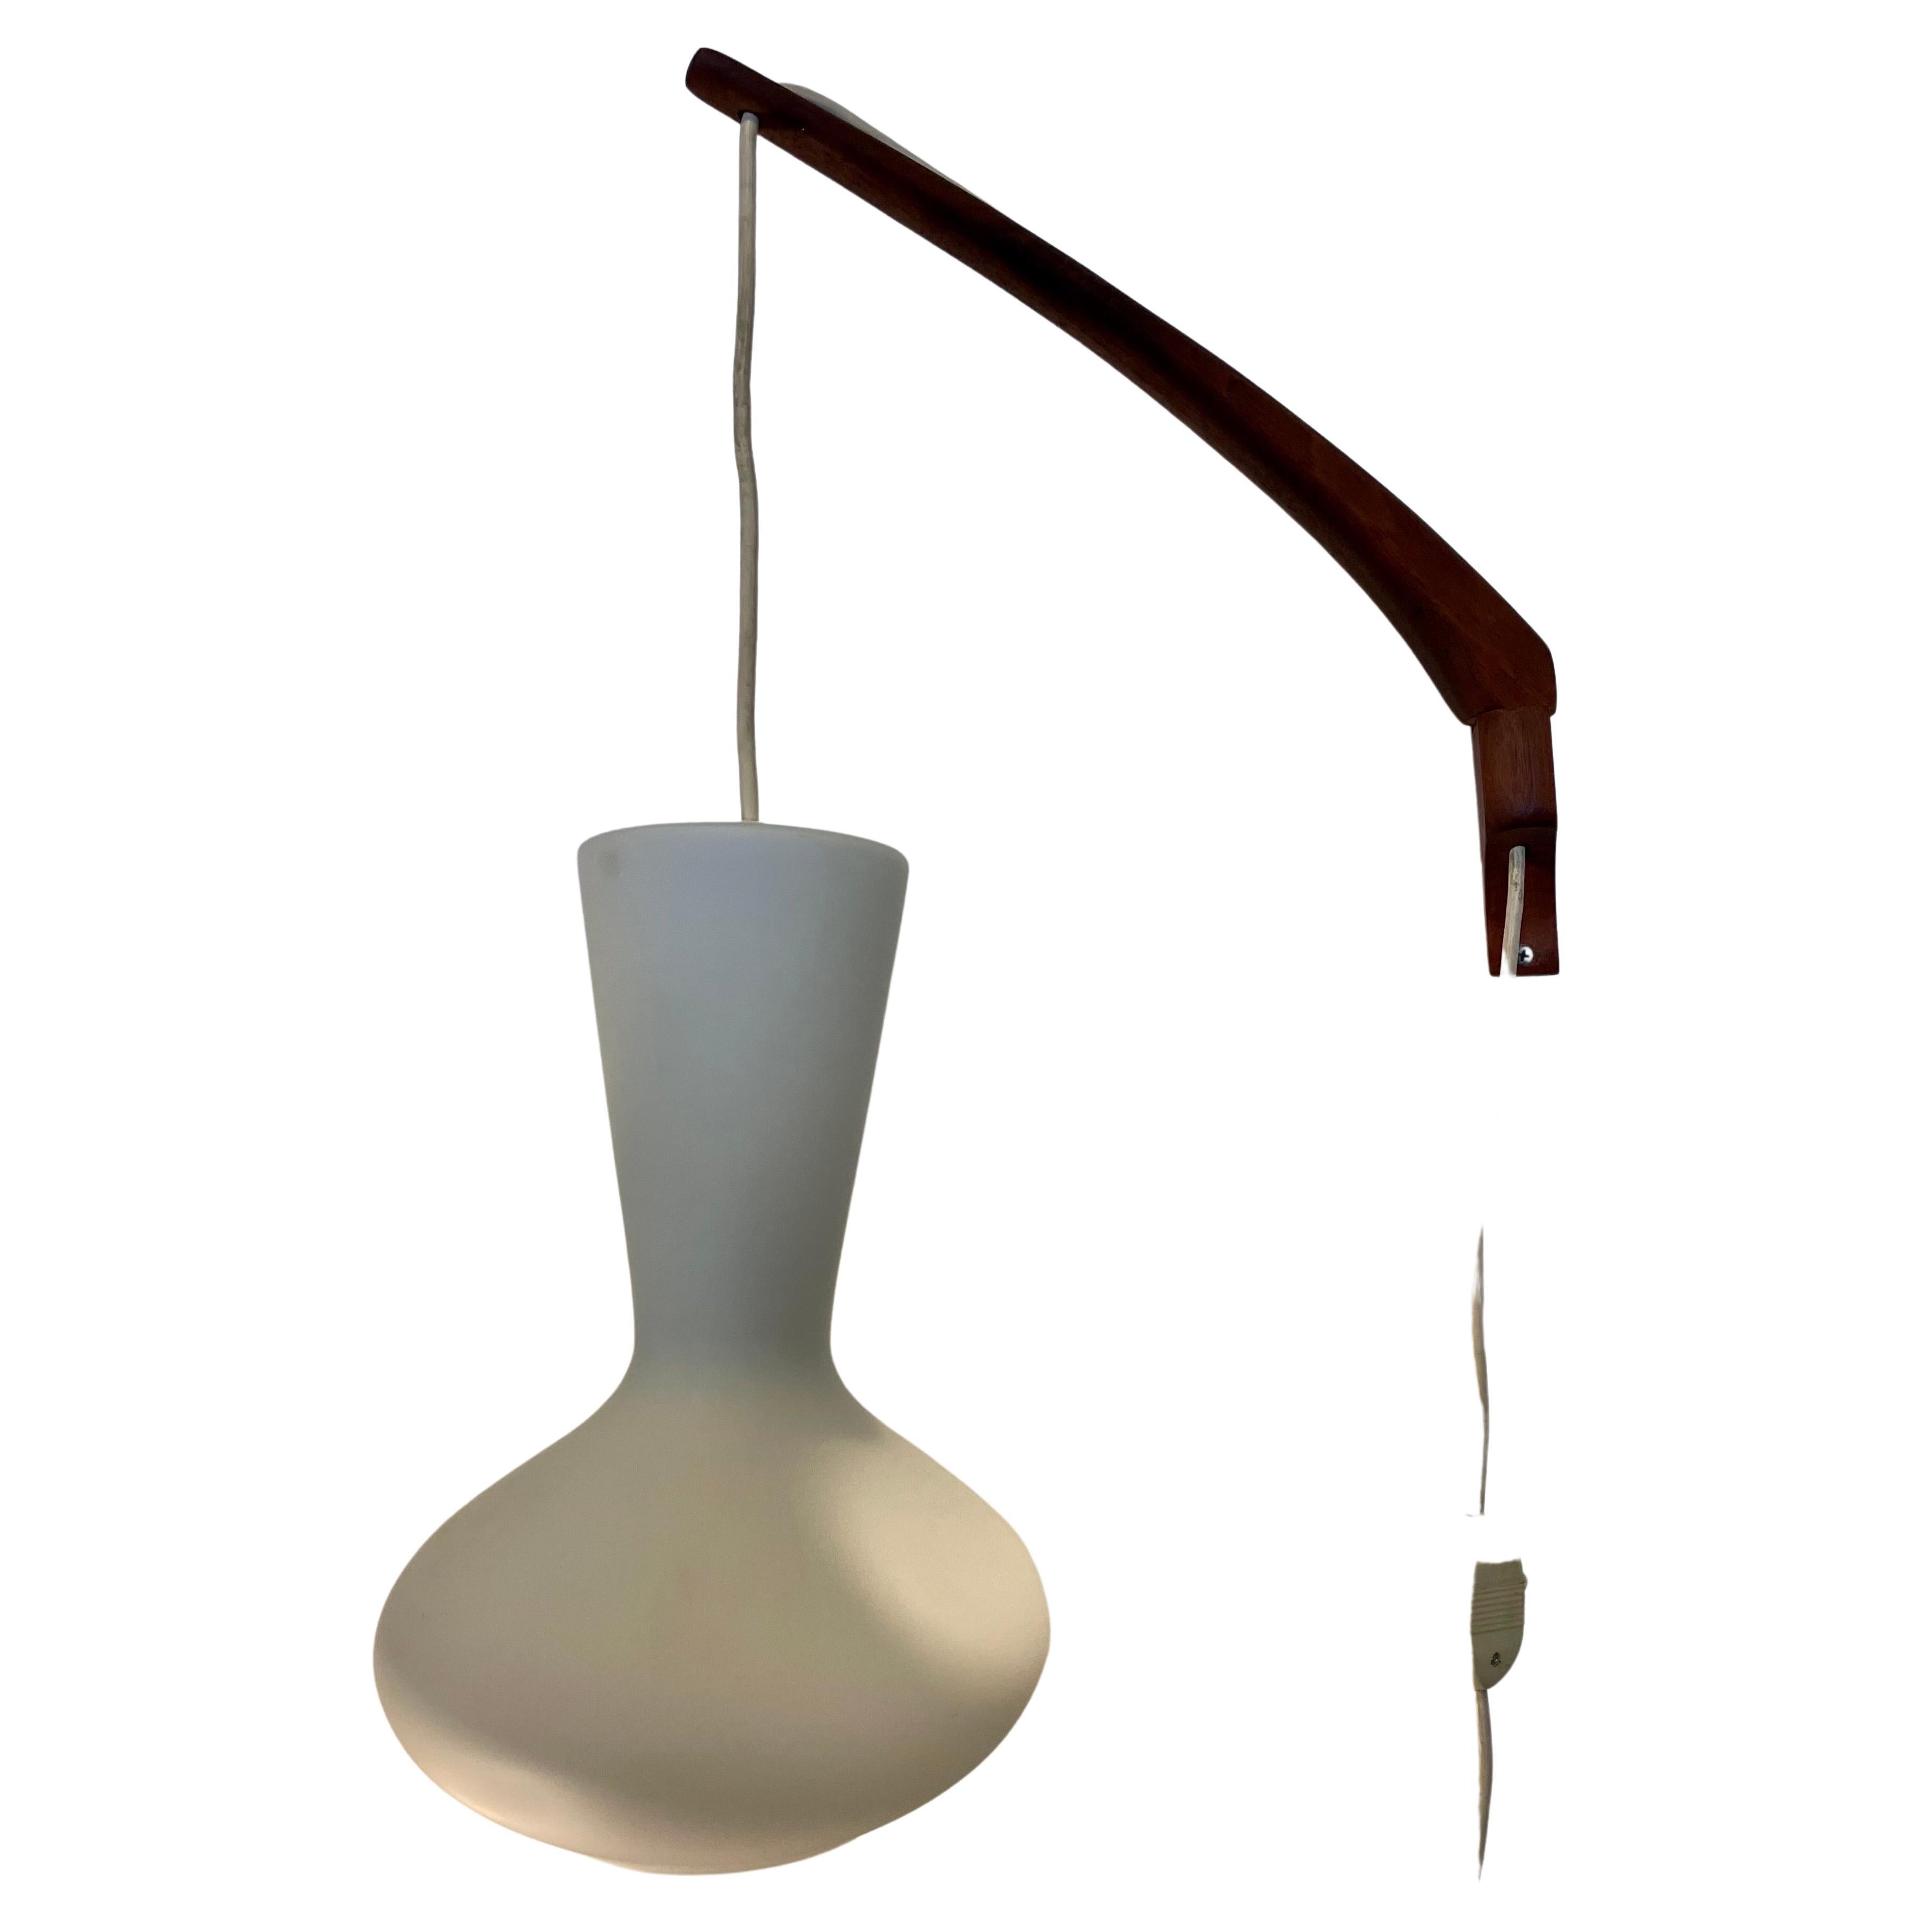 A very rare glass swag lamp designed by Lisa Johansson-Pape with solid teak arm and plug-in cord with switch integrated, excellent condition and working perfectly, circa 1950's , the glass shade its 12